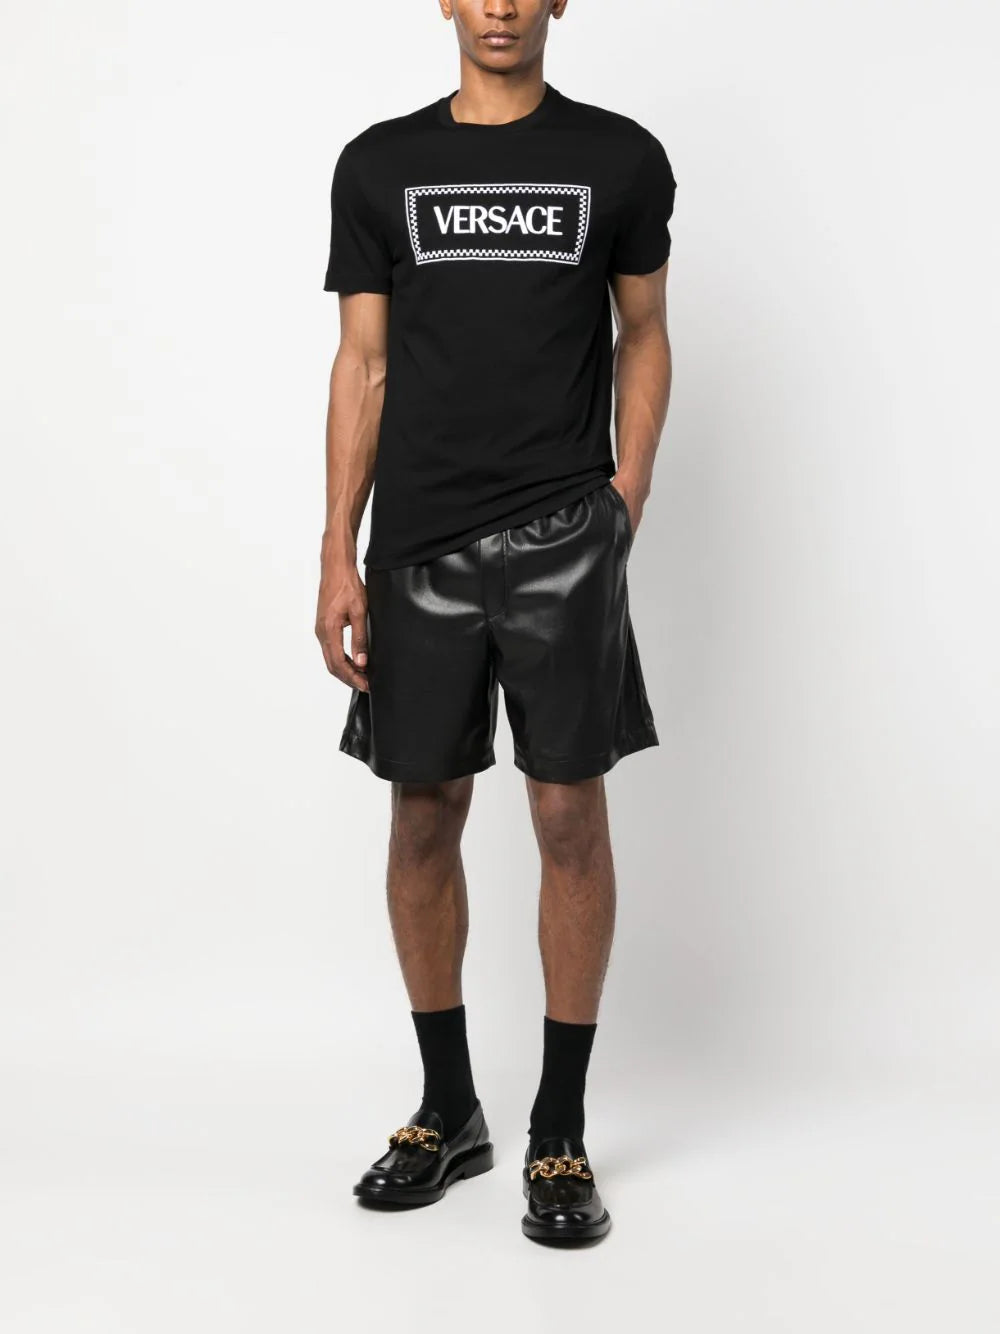 Versace Black Embroidered Checkered Logo T-shirt